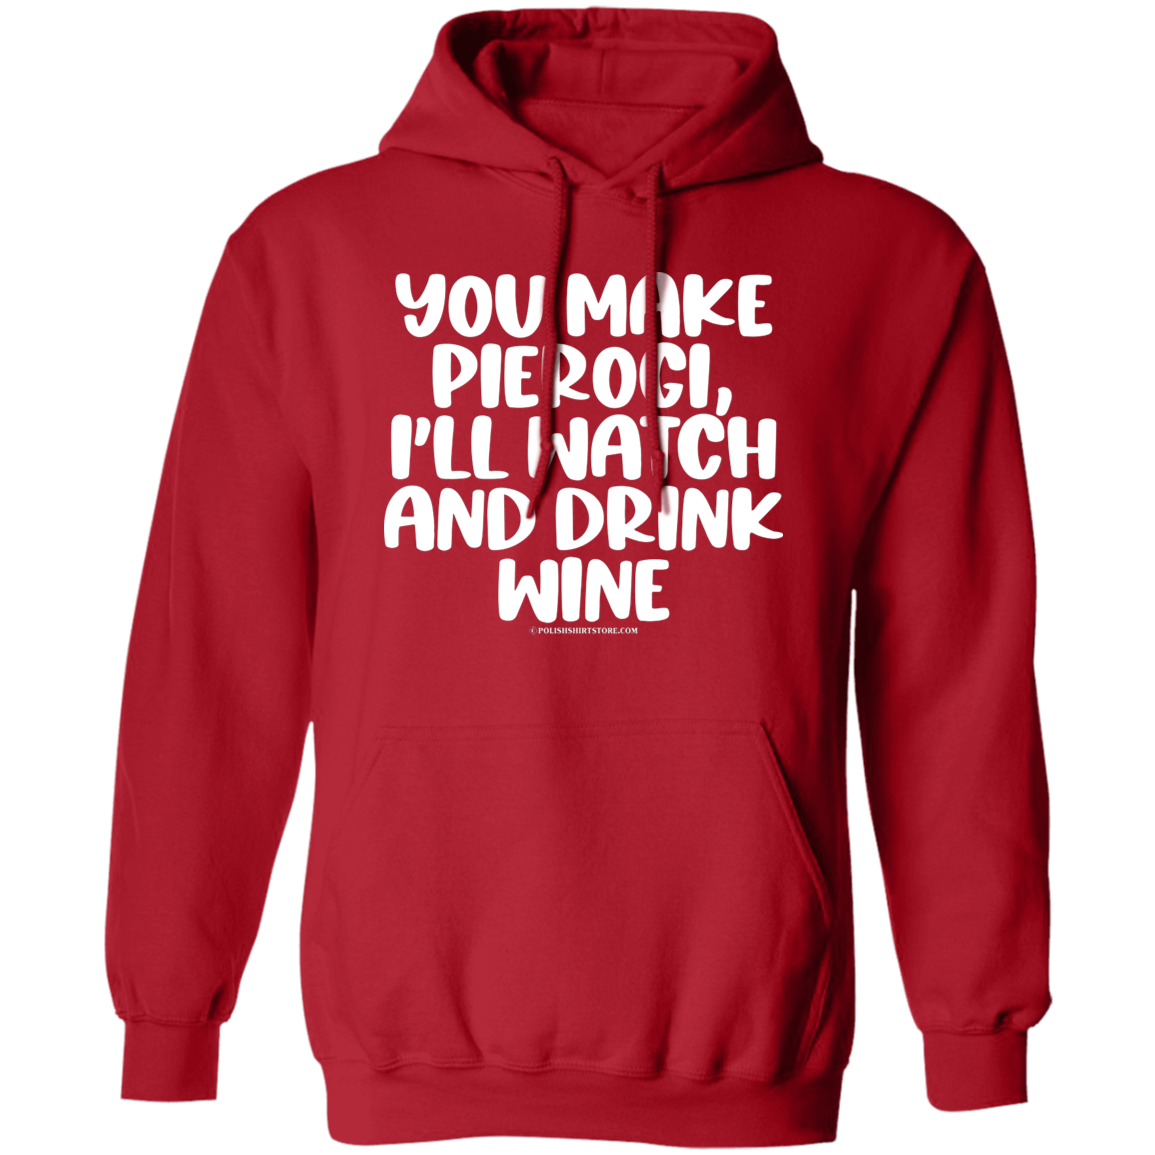 You Make Pierogi I'll Watch And Drink Wine Apparel CustomCat G185 Pullover Hoodie Red S